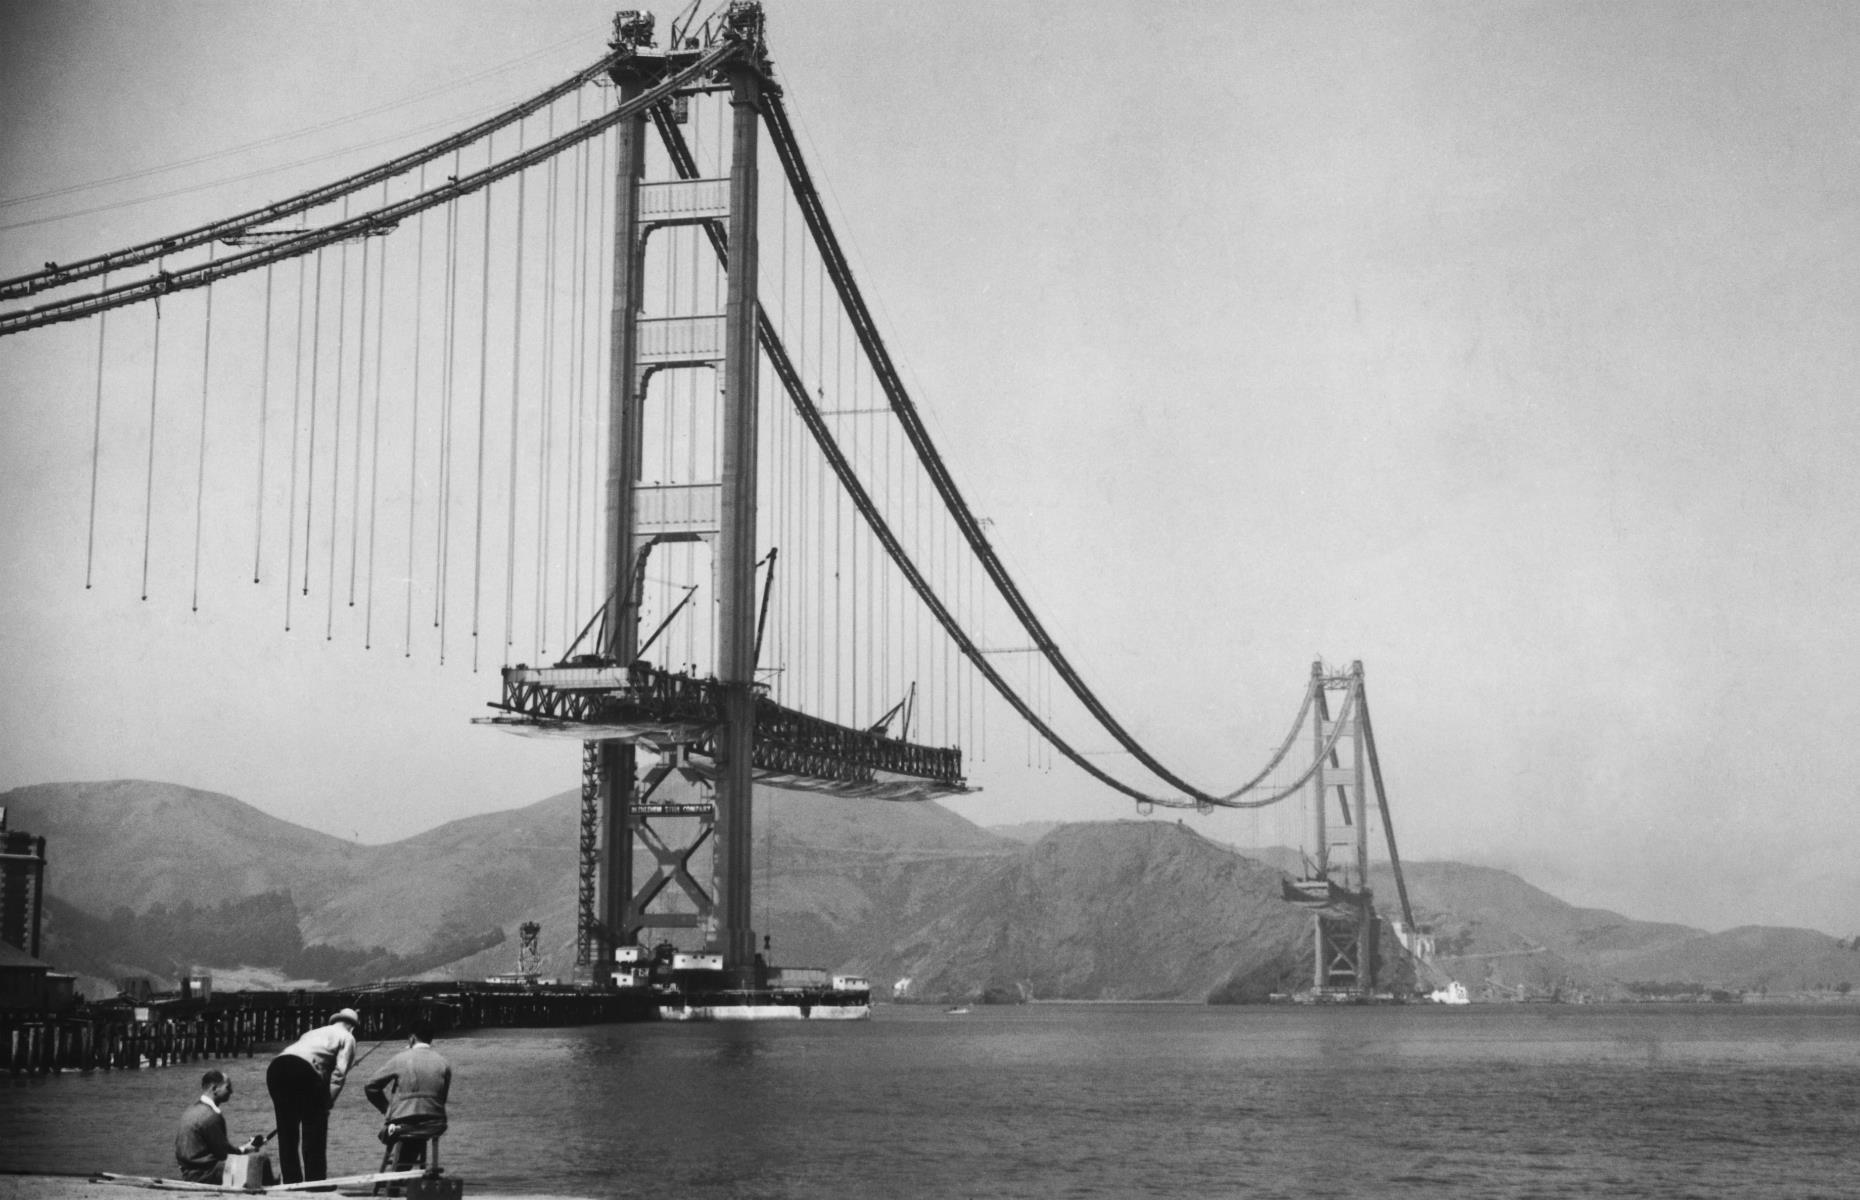 <p>When the Golden Gate Bridge opened to pedestrians in 1937, the celebrations lasted for a week. The longest and tallest suspension bridge in the world received more than 200,000 foot passengers on its first day. The architecturally stunning bridge was an instant hit and became a symbol of San Francisco. It was one of America’s top-visited attractions, which it remains today. Here the bridge is pictured in the early 1950s. For more amazing constructions, <a href="https://www.loveexploring.com/gallerylist/71687/the-most-impressive-bridge-in-every-us-state">check out the most impressive bridge in every state</a>.</p>